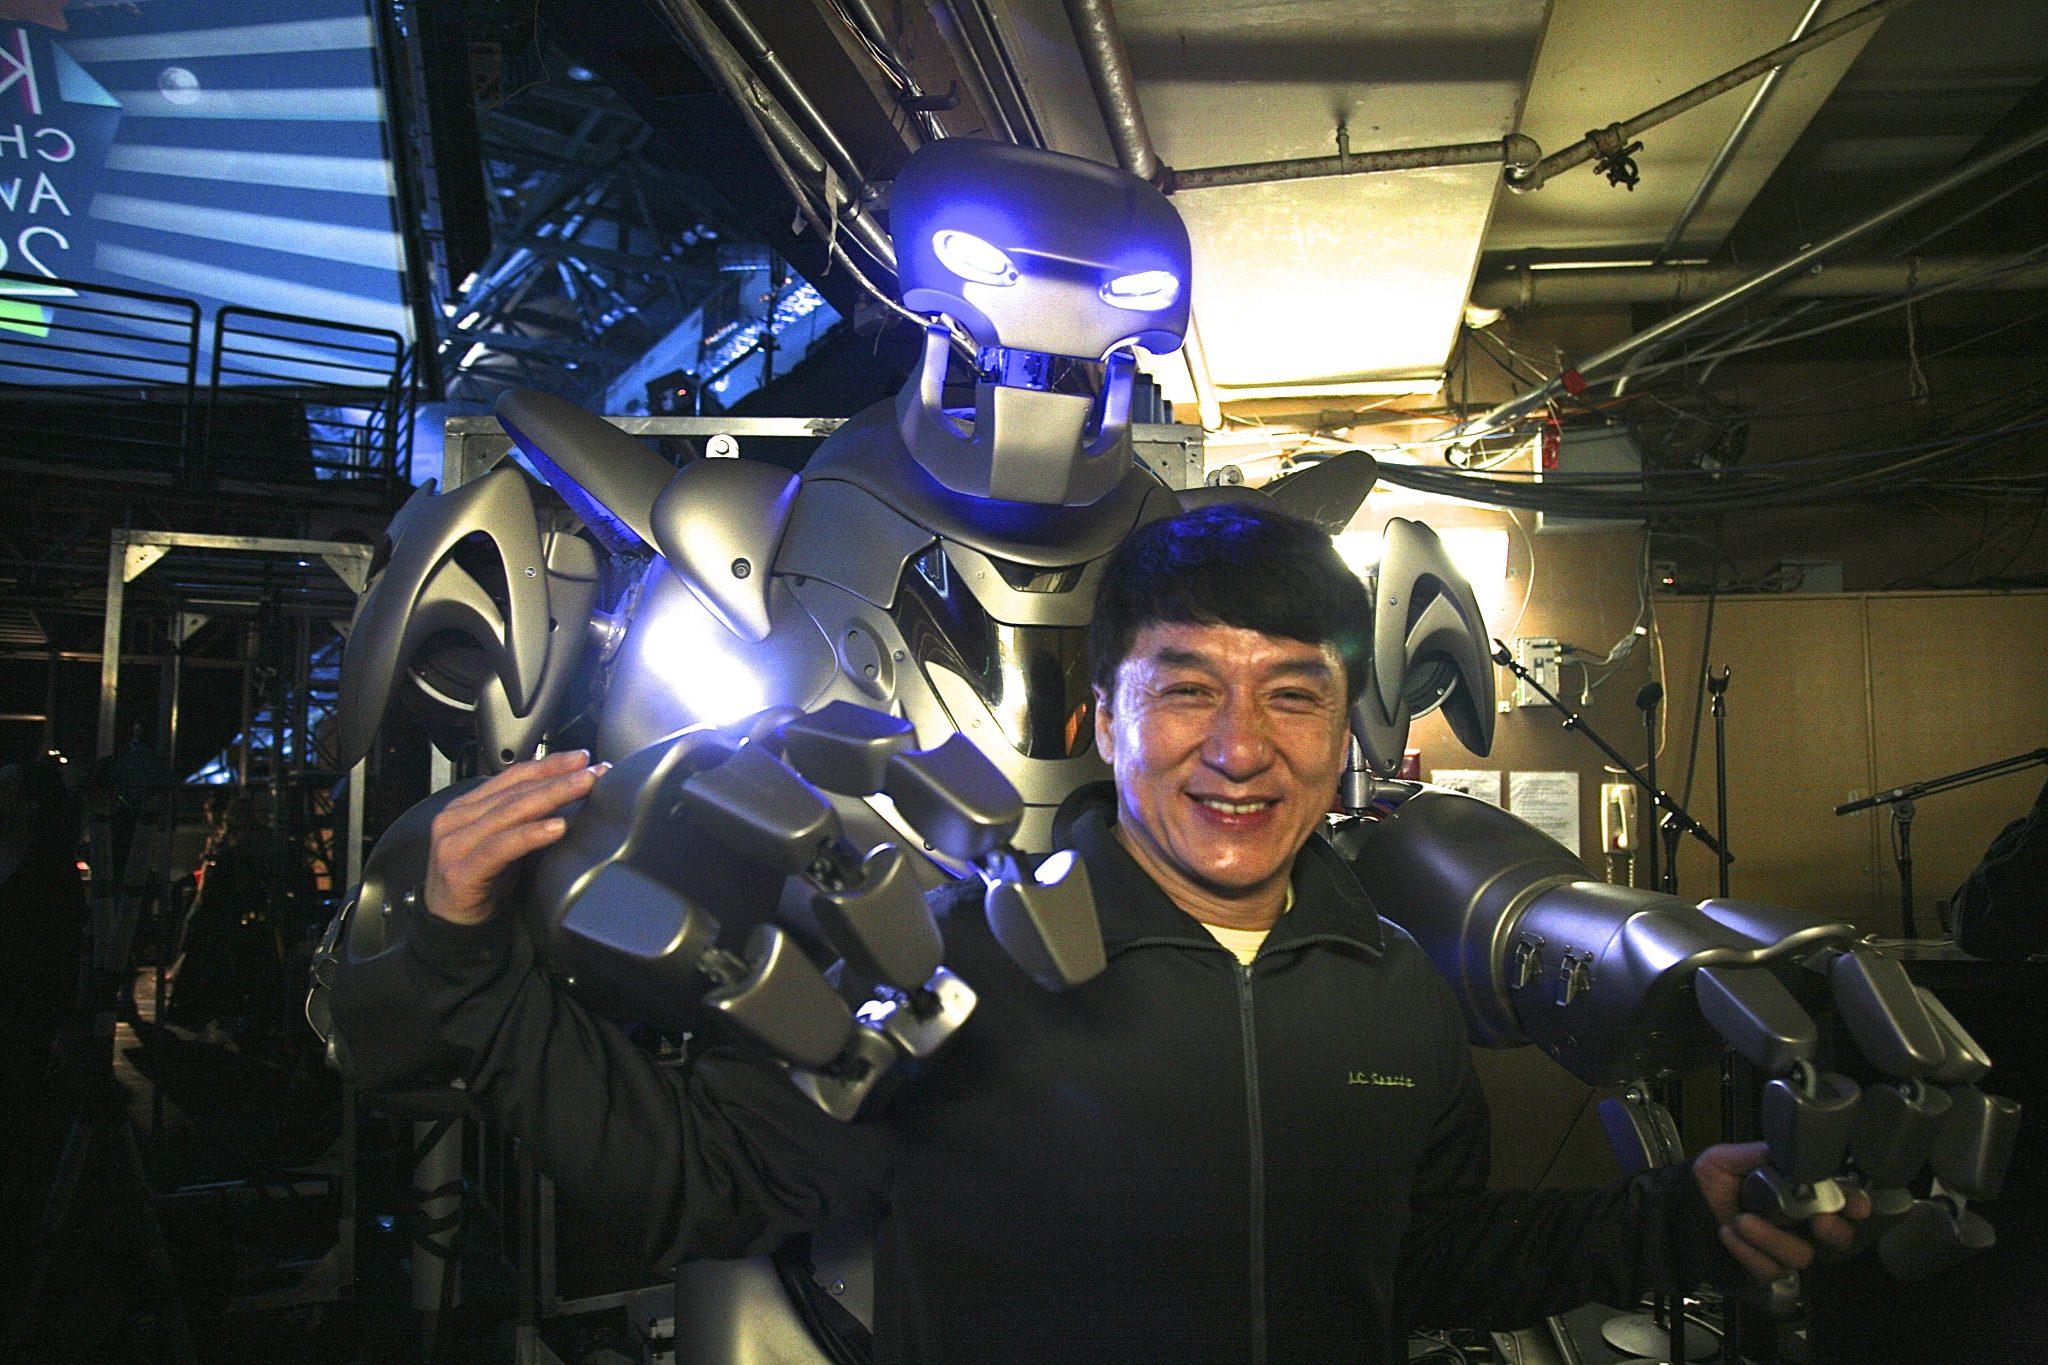 Titan the Robot with Jackie Chan backstage at the Kids Choice Awards in LA, USA.